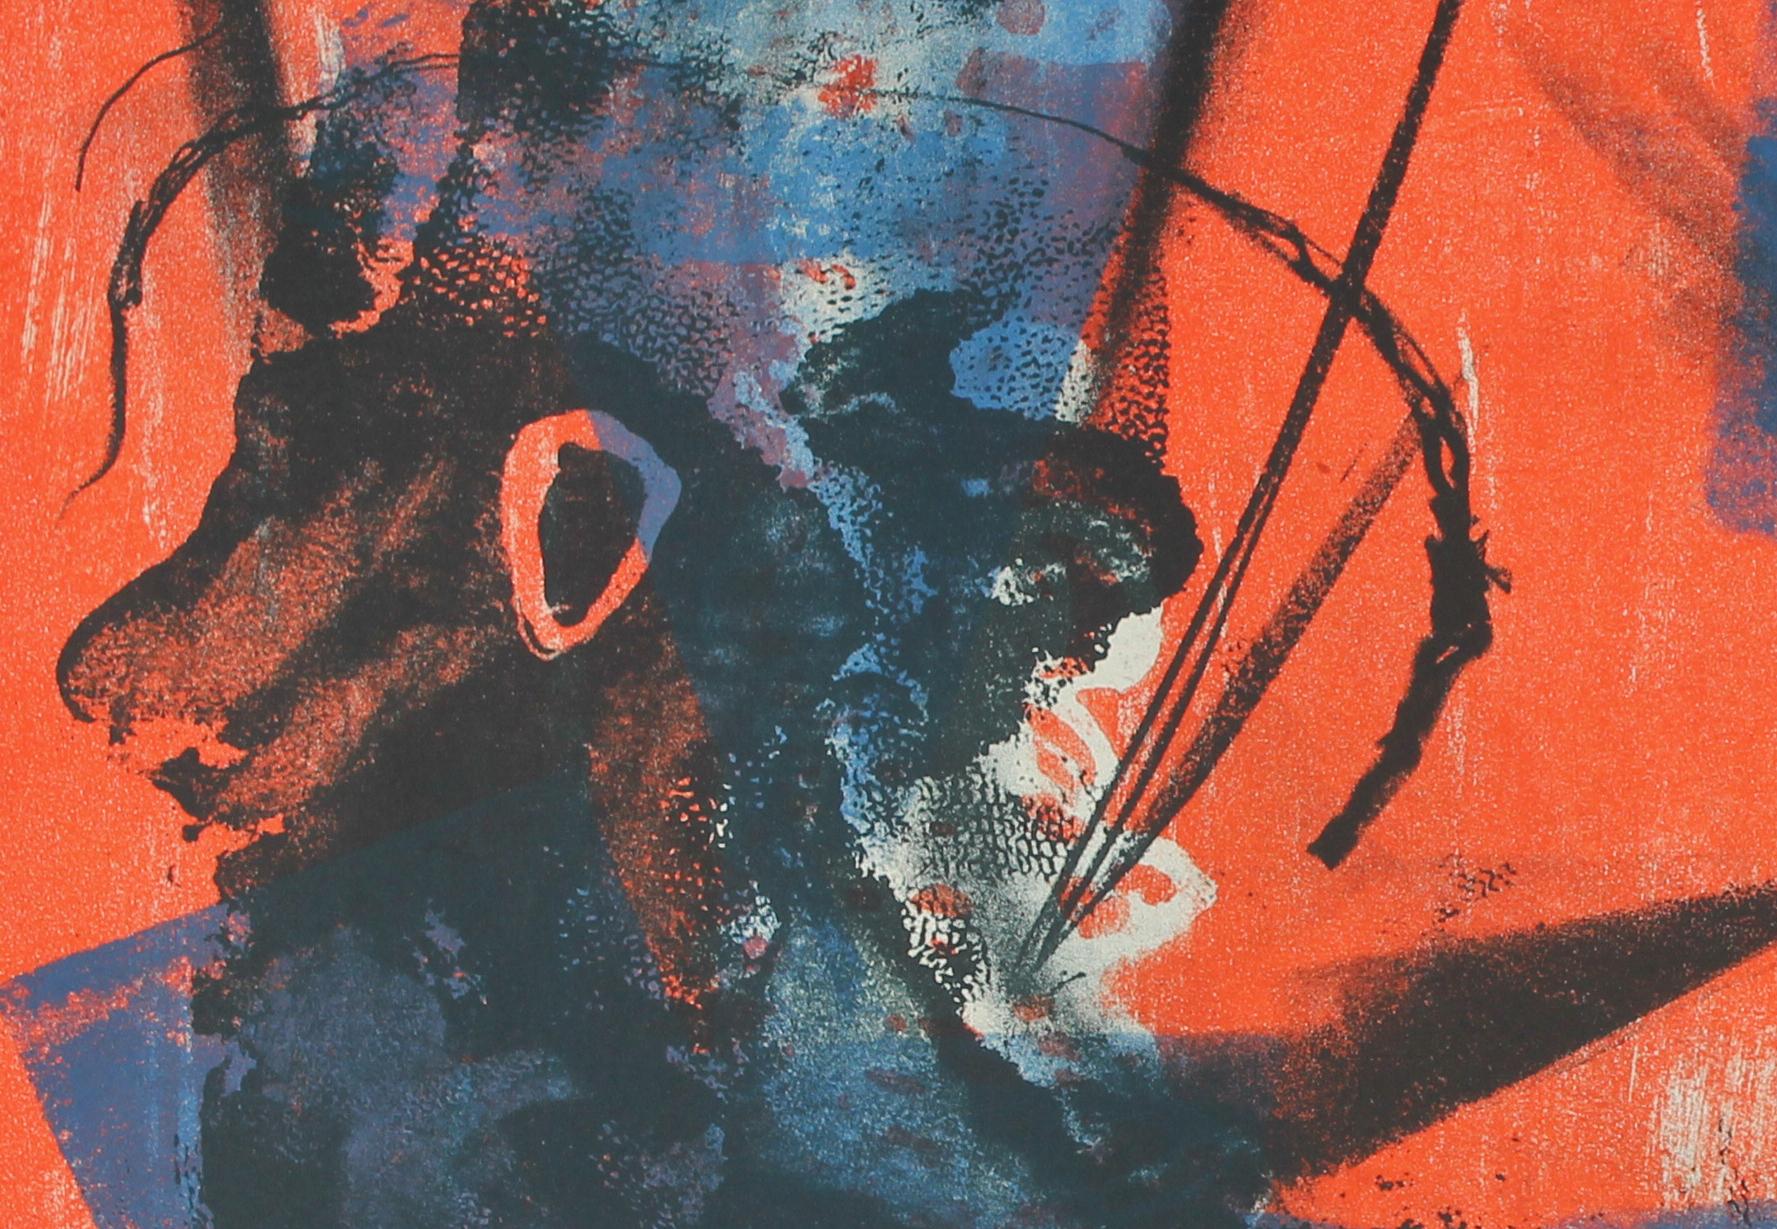 Abstract Expressionist Lithograph in Bright Blue and Orange, Circa 1950s - Print by Jerry Opper